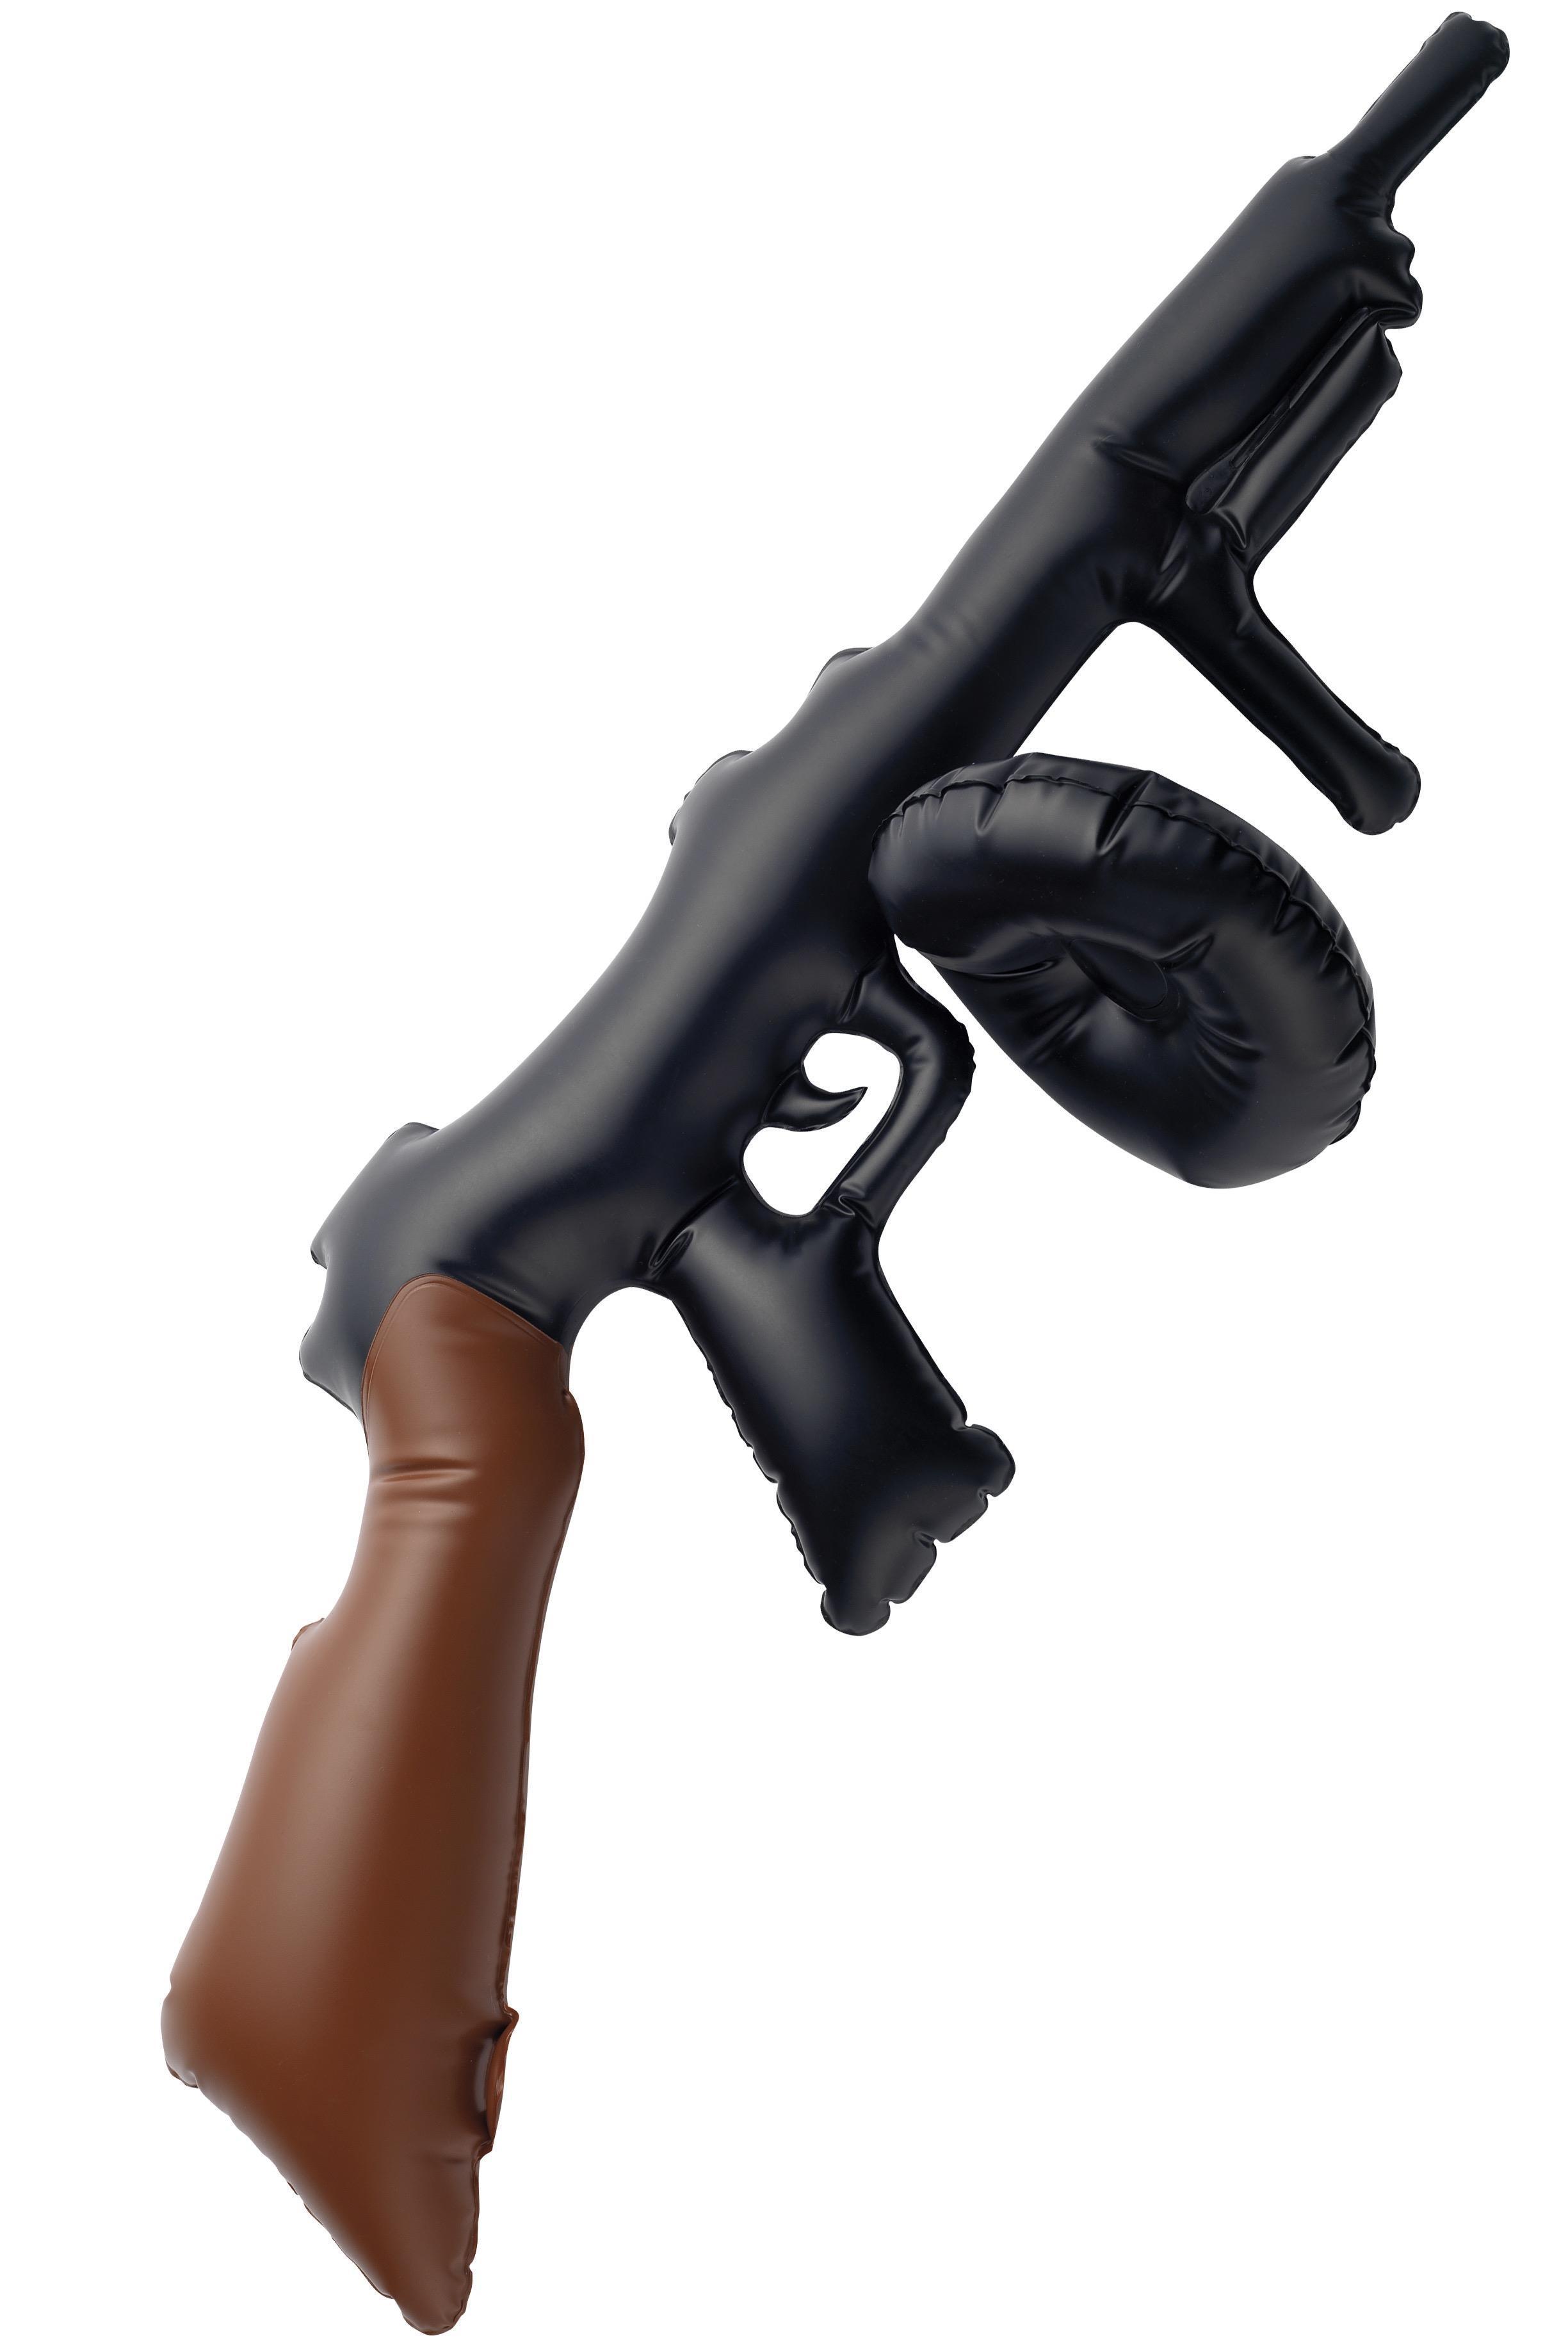 Inflatable Tommy gun